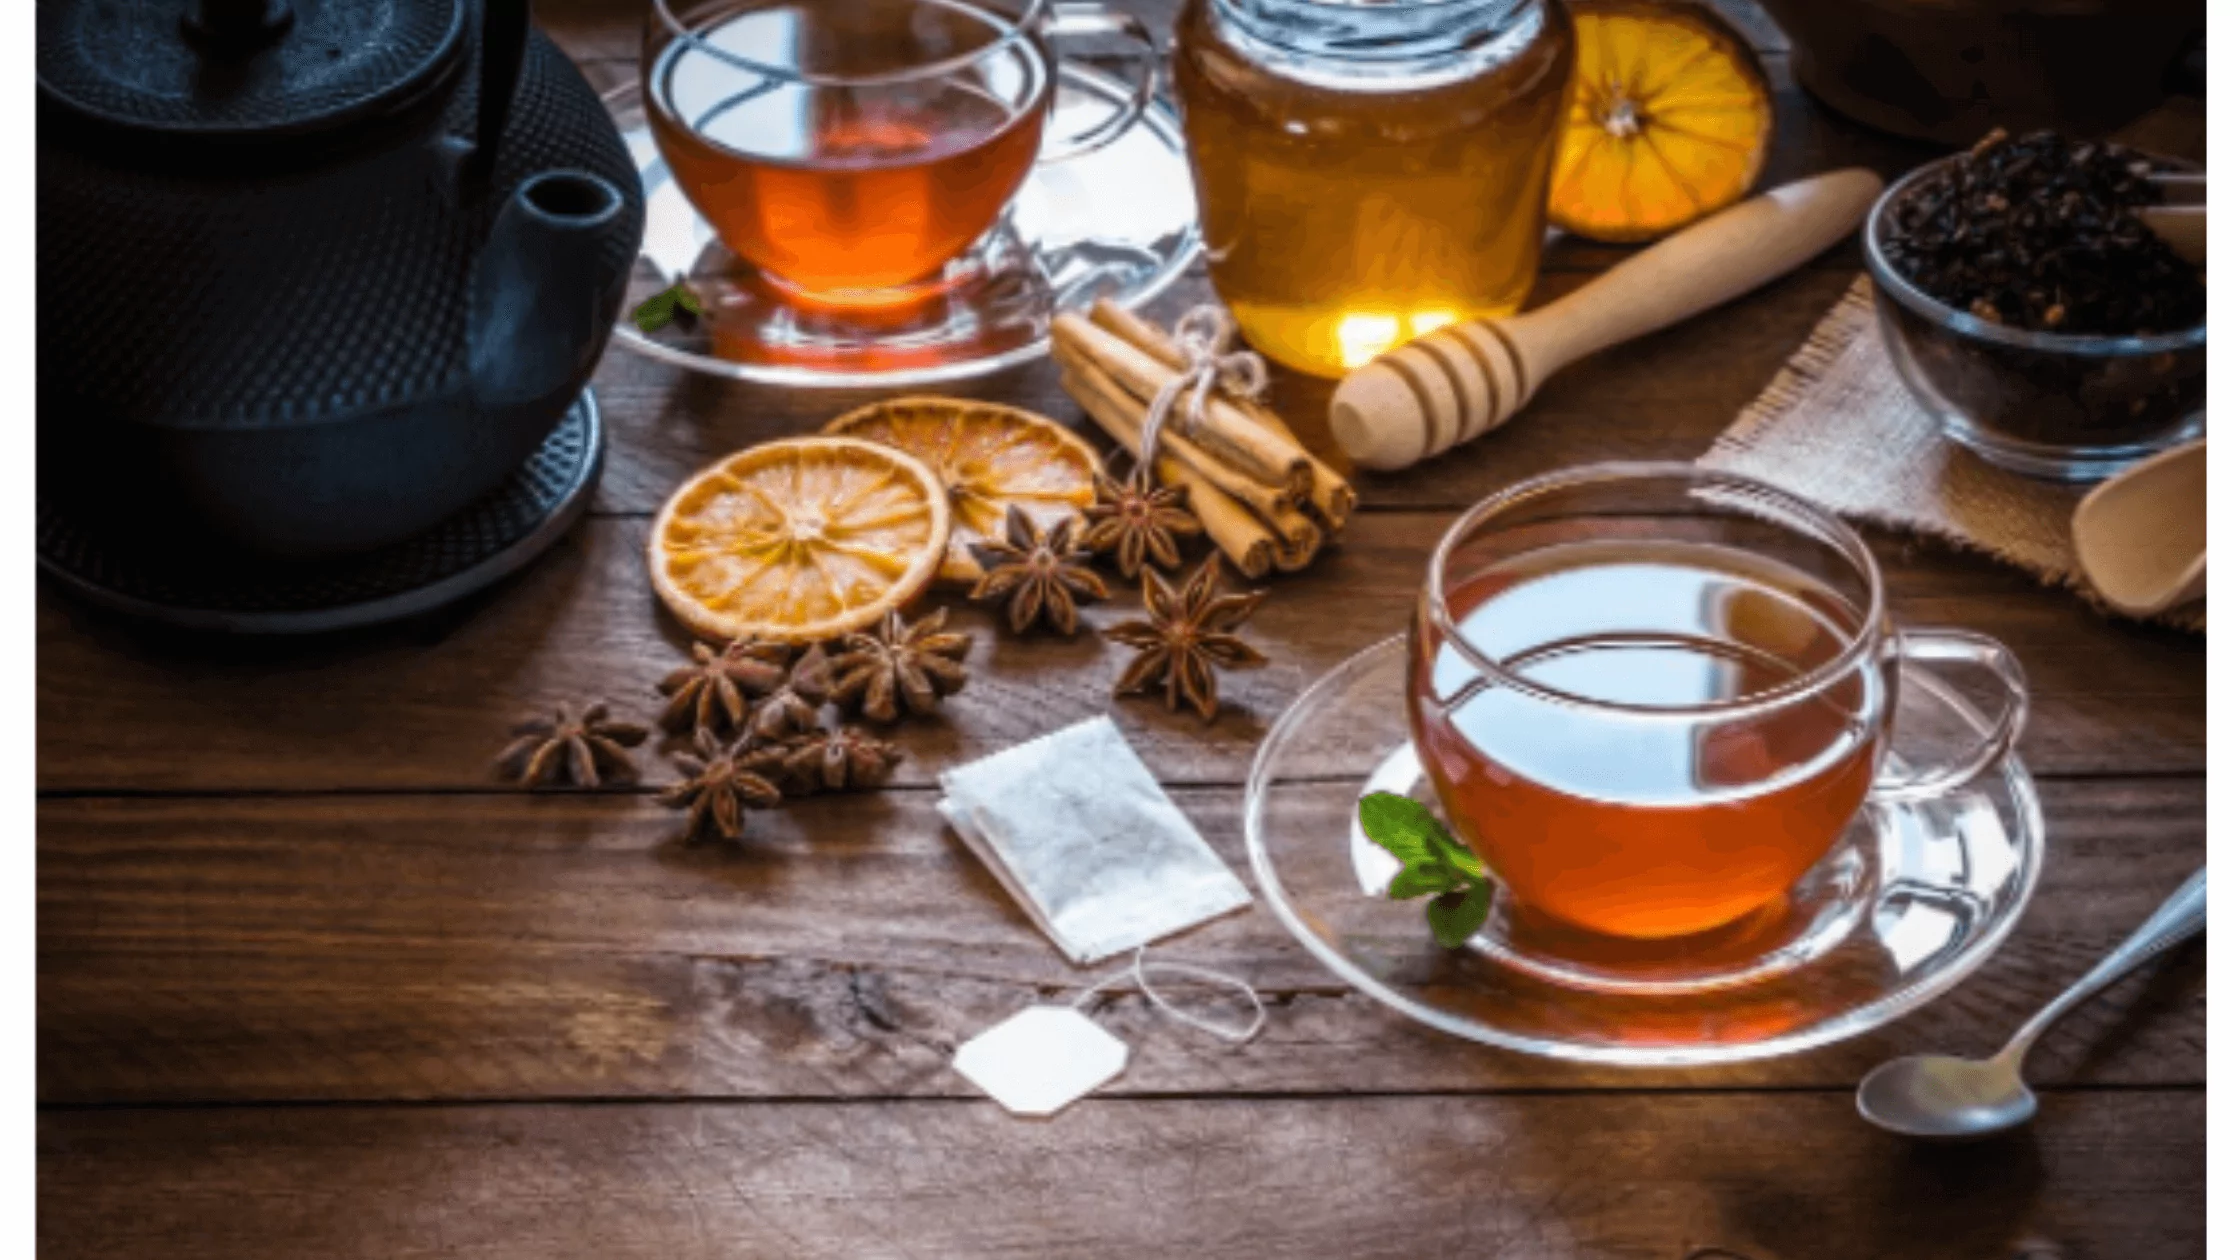 Precious Tips To Help You Get Better At Does Tea Raise Cholesterol?